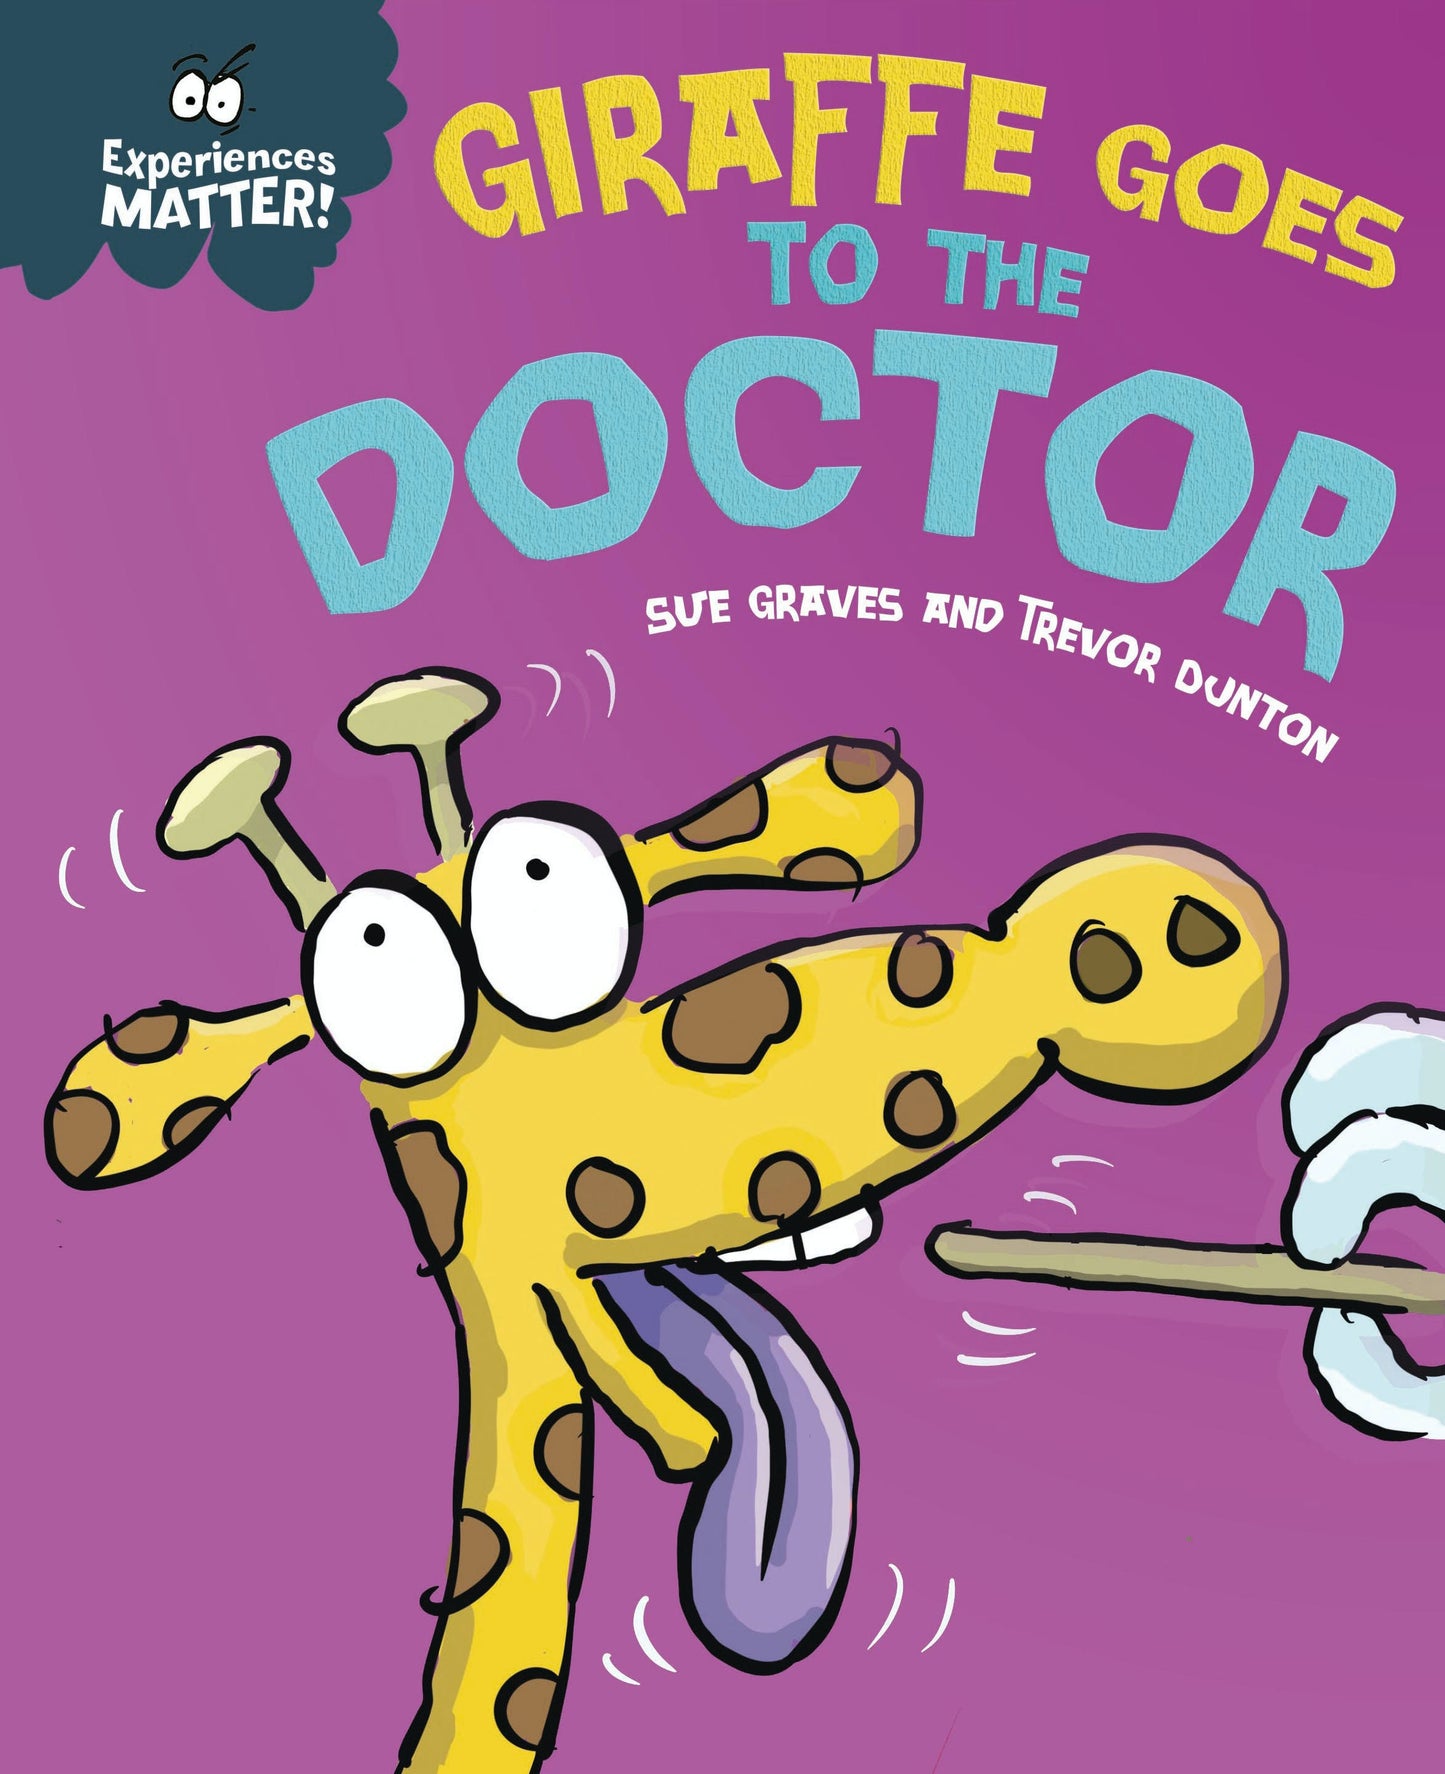 Experiences Matter: Giraffe Goes to the Doctor (Was €9.00 Now €3.50)